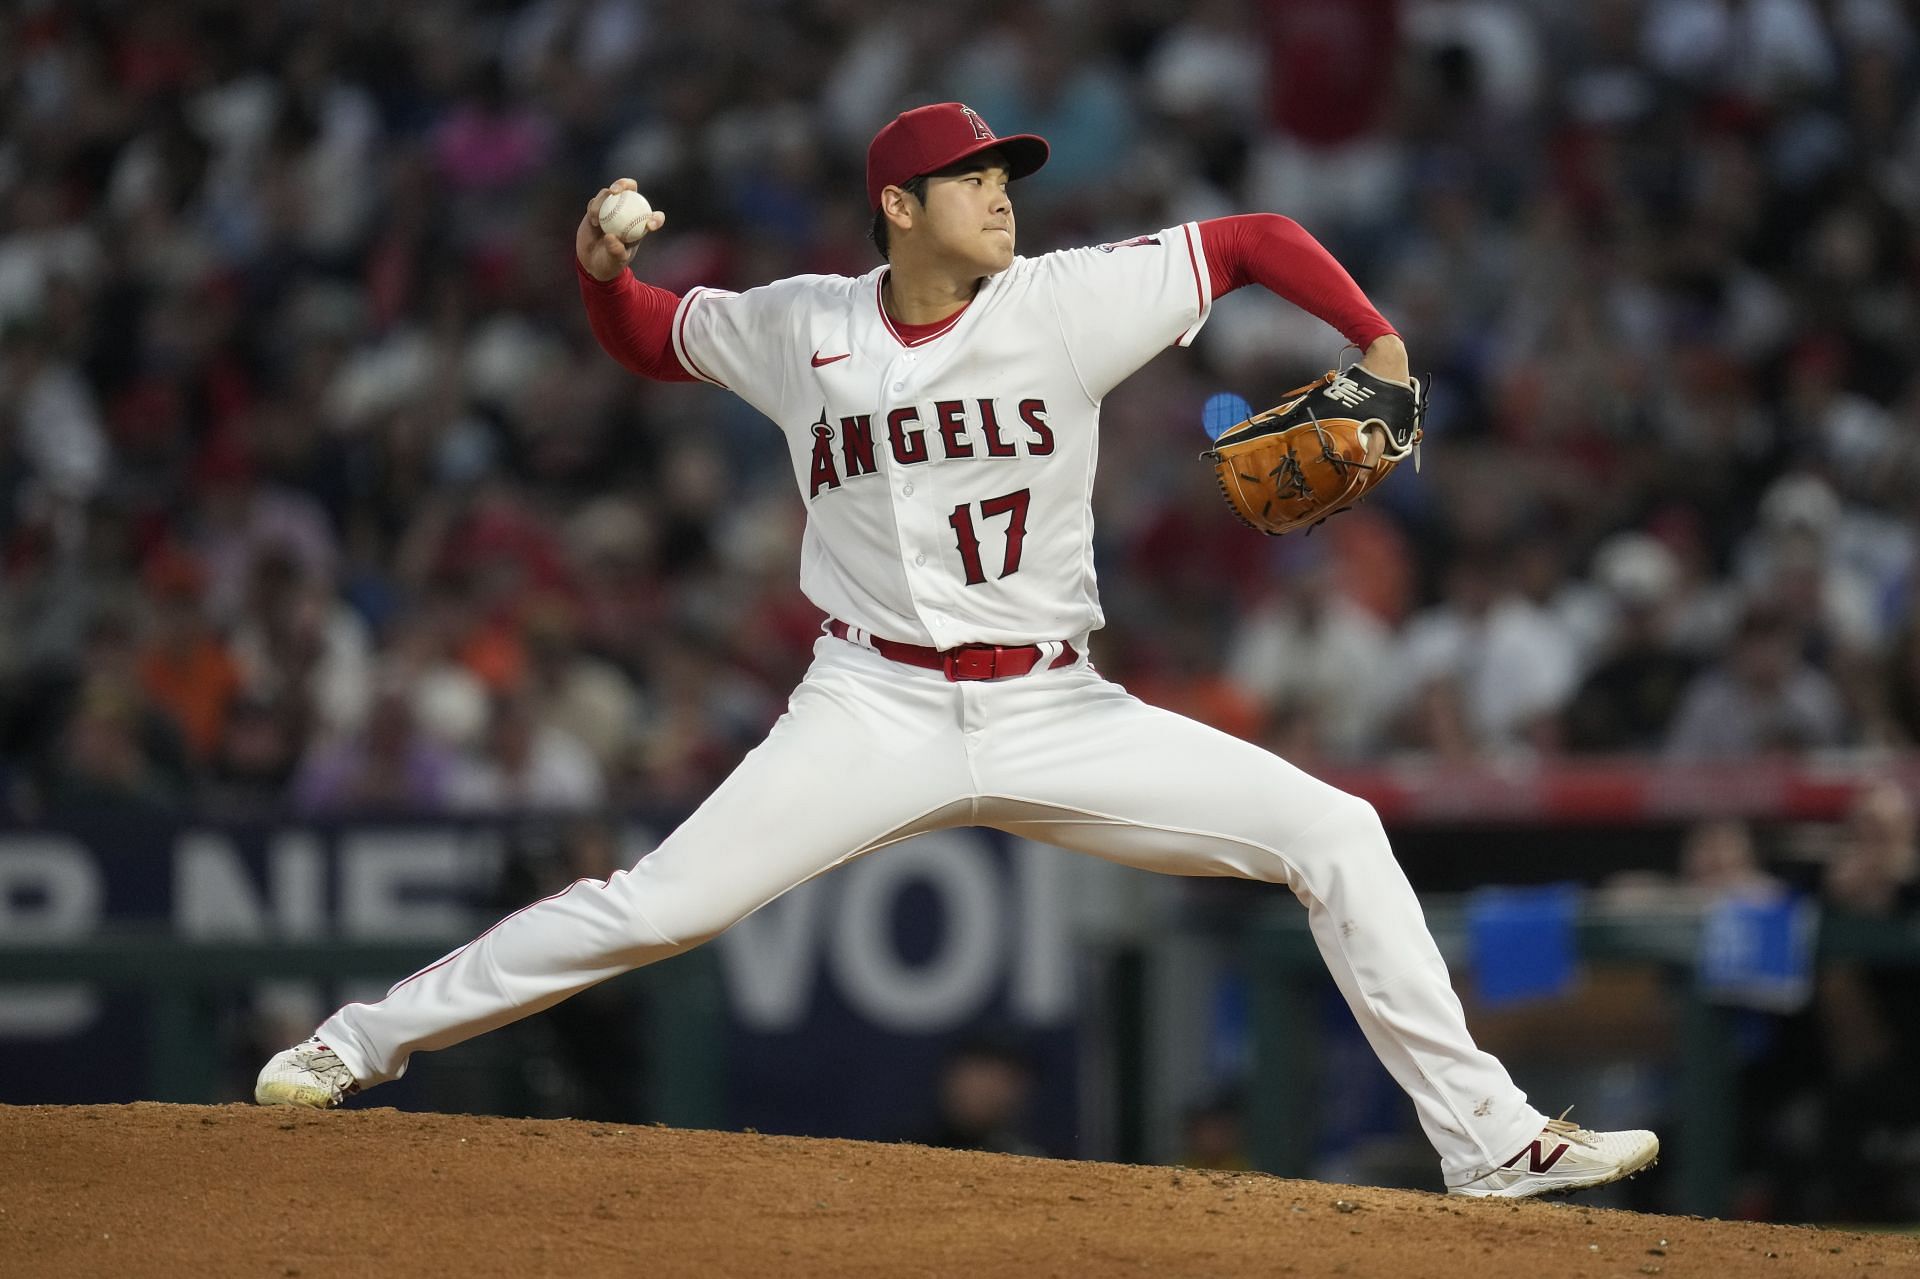 Los Angeles Angels starting pitcher Shohei Ohtani (17) throws during the fifth inning of a baseball game against the San Francisco Giants in Anaheim, Calif., Wednesday, Aug. 9, 2023. (AP Photo/Ashley Landis)